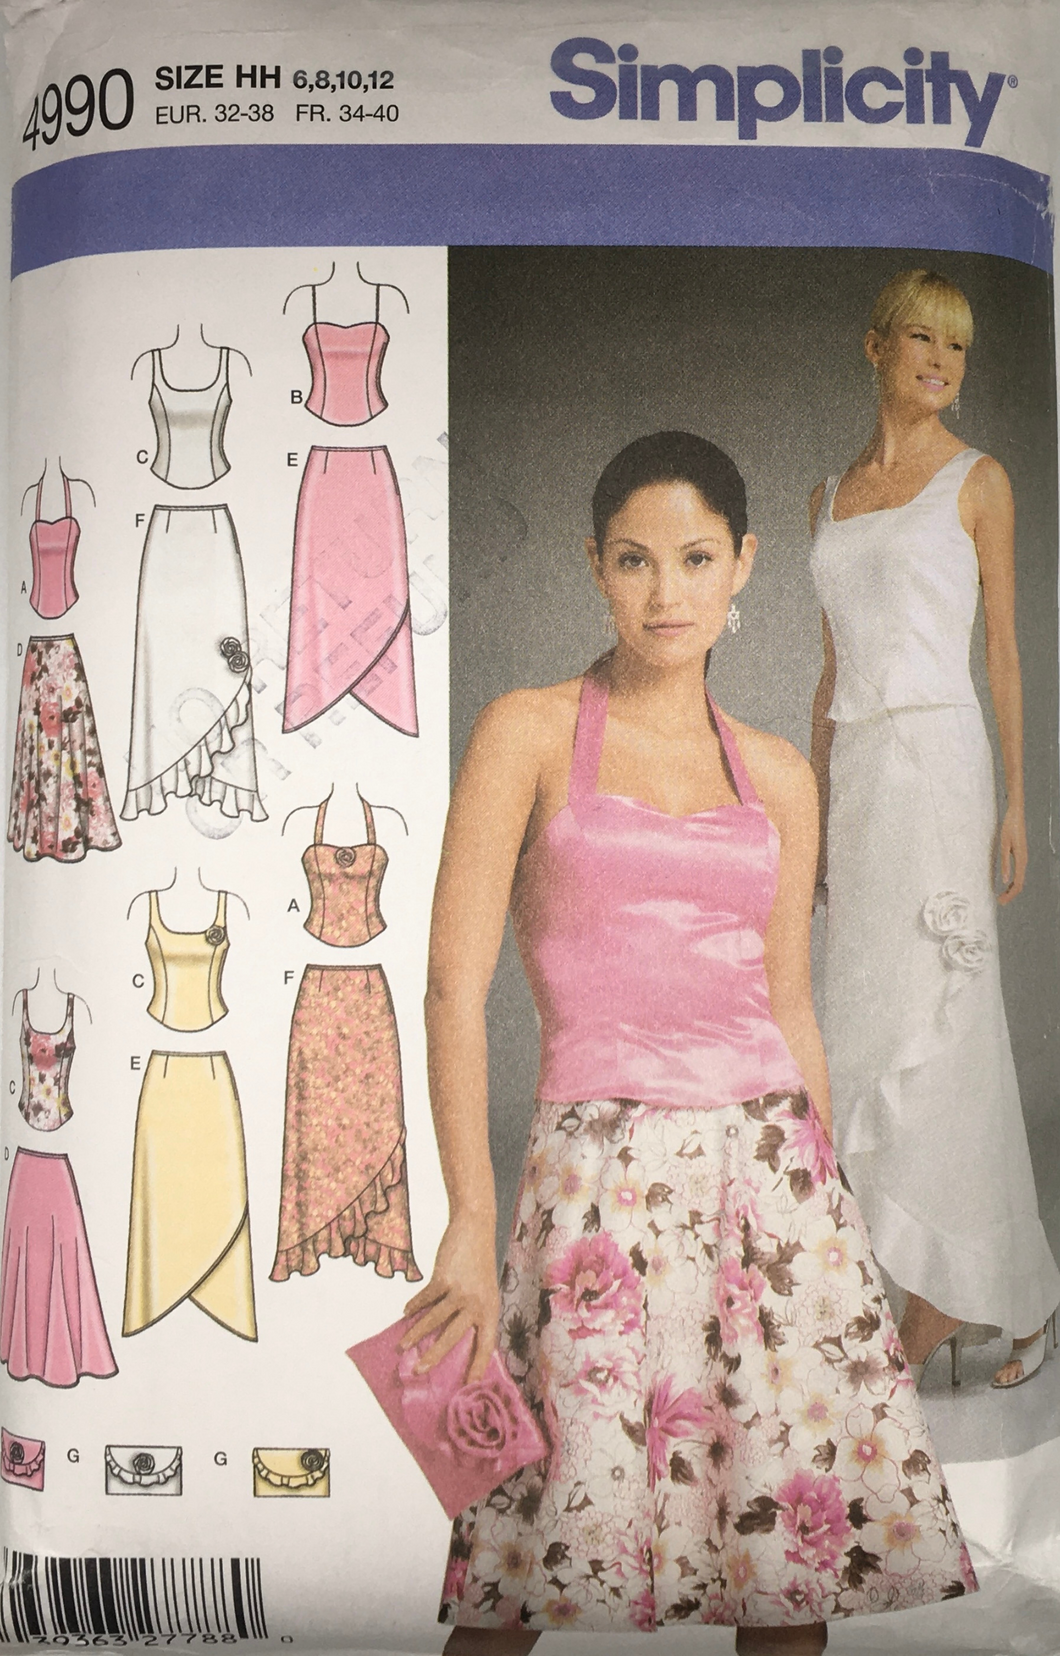 2004 Sewing Pattern: Simplicity 4990